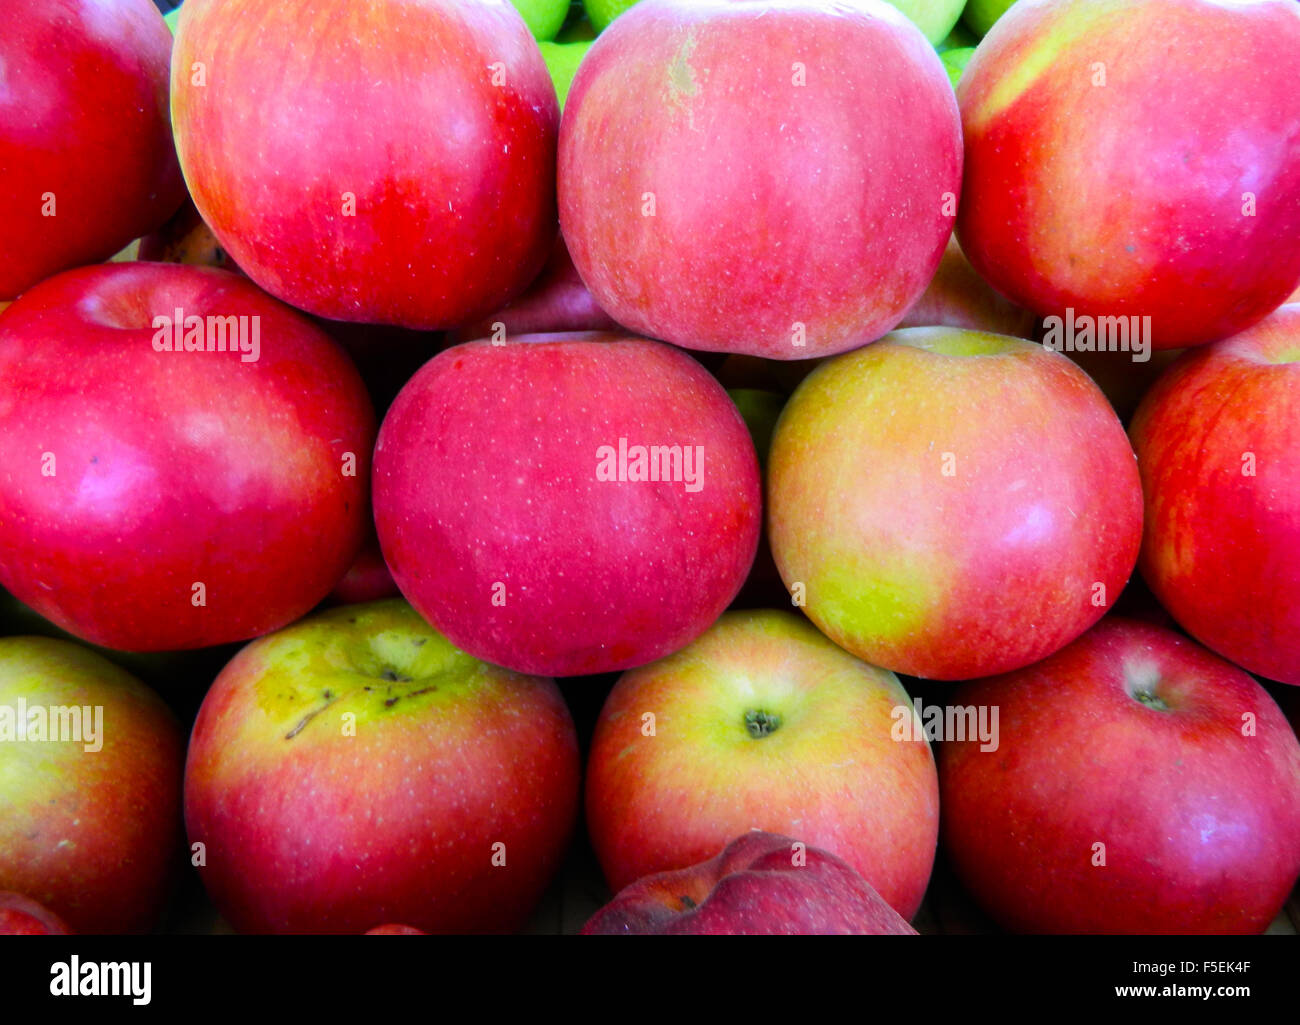 Red apples on the counter market waiting to be buy. Stock Photo